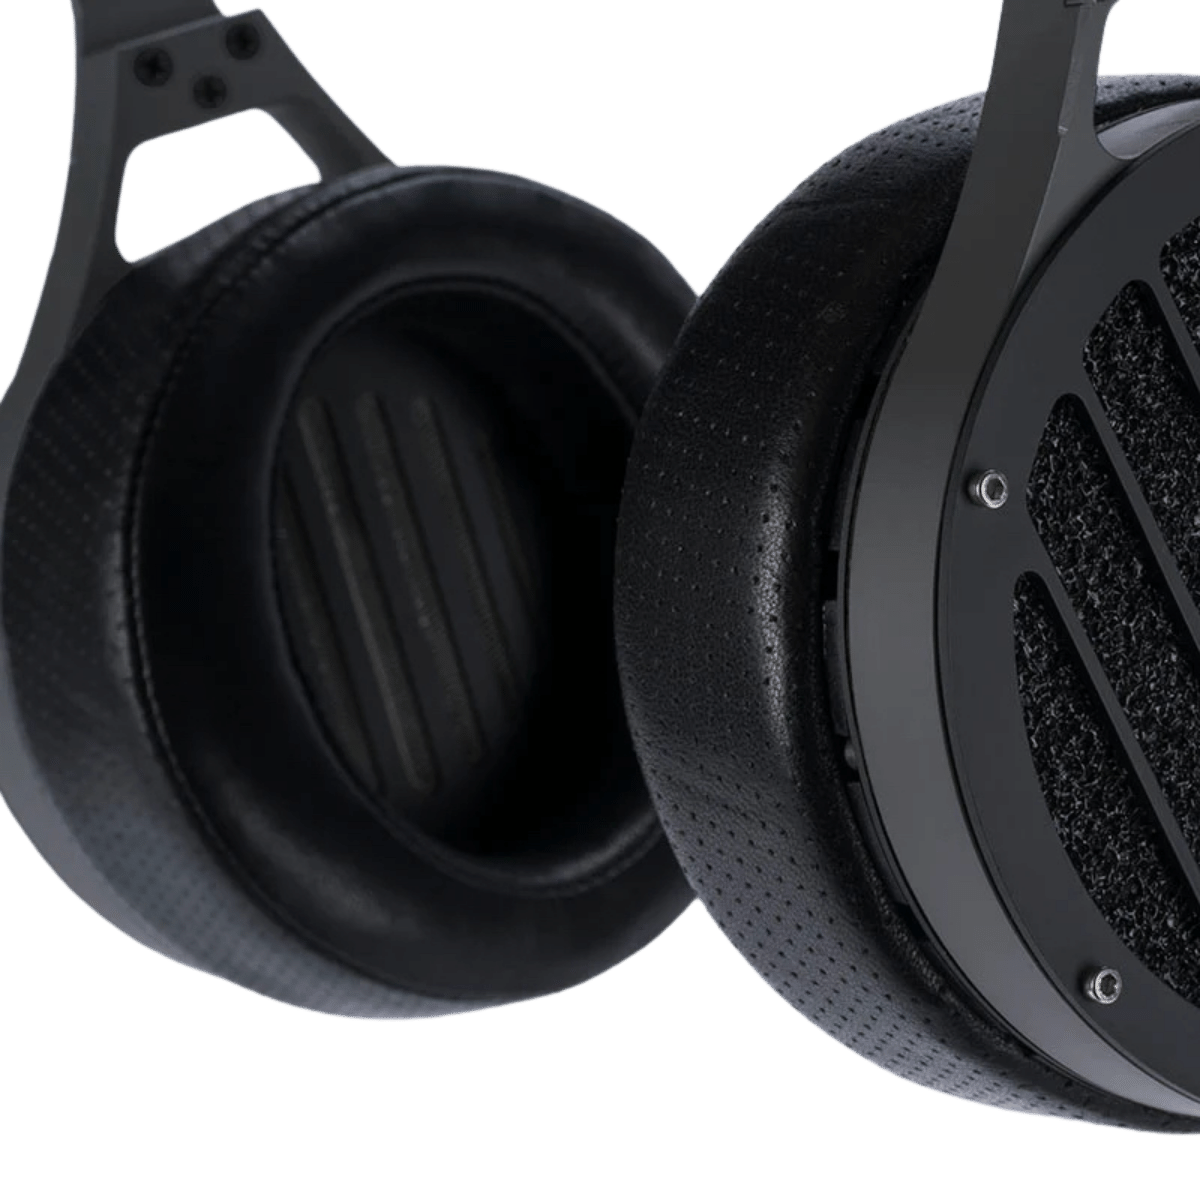 The Abyss AB-1266 Phi TC headphones